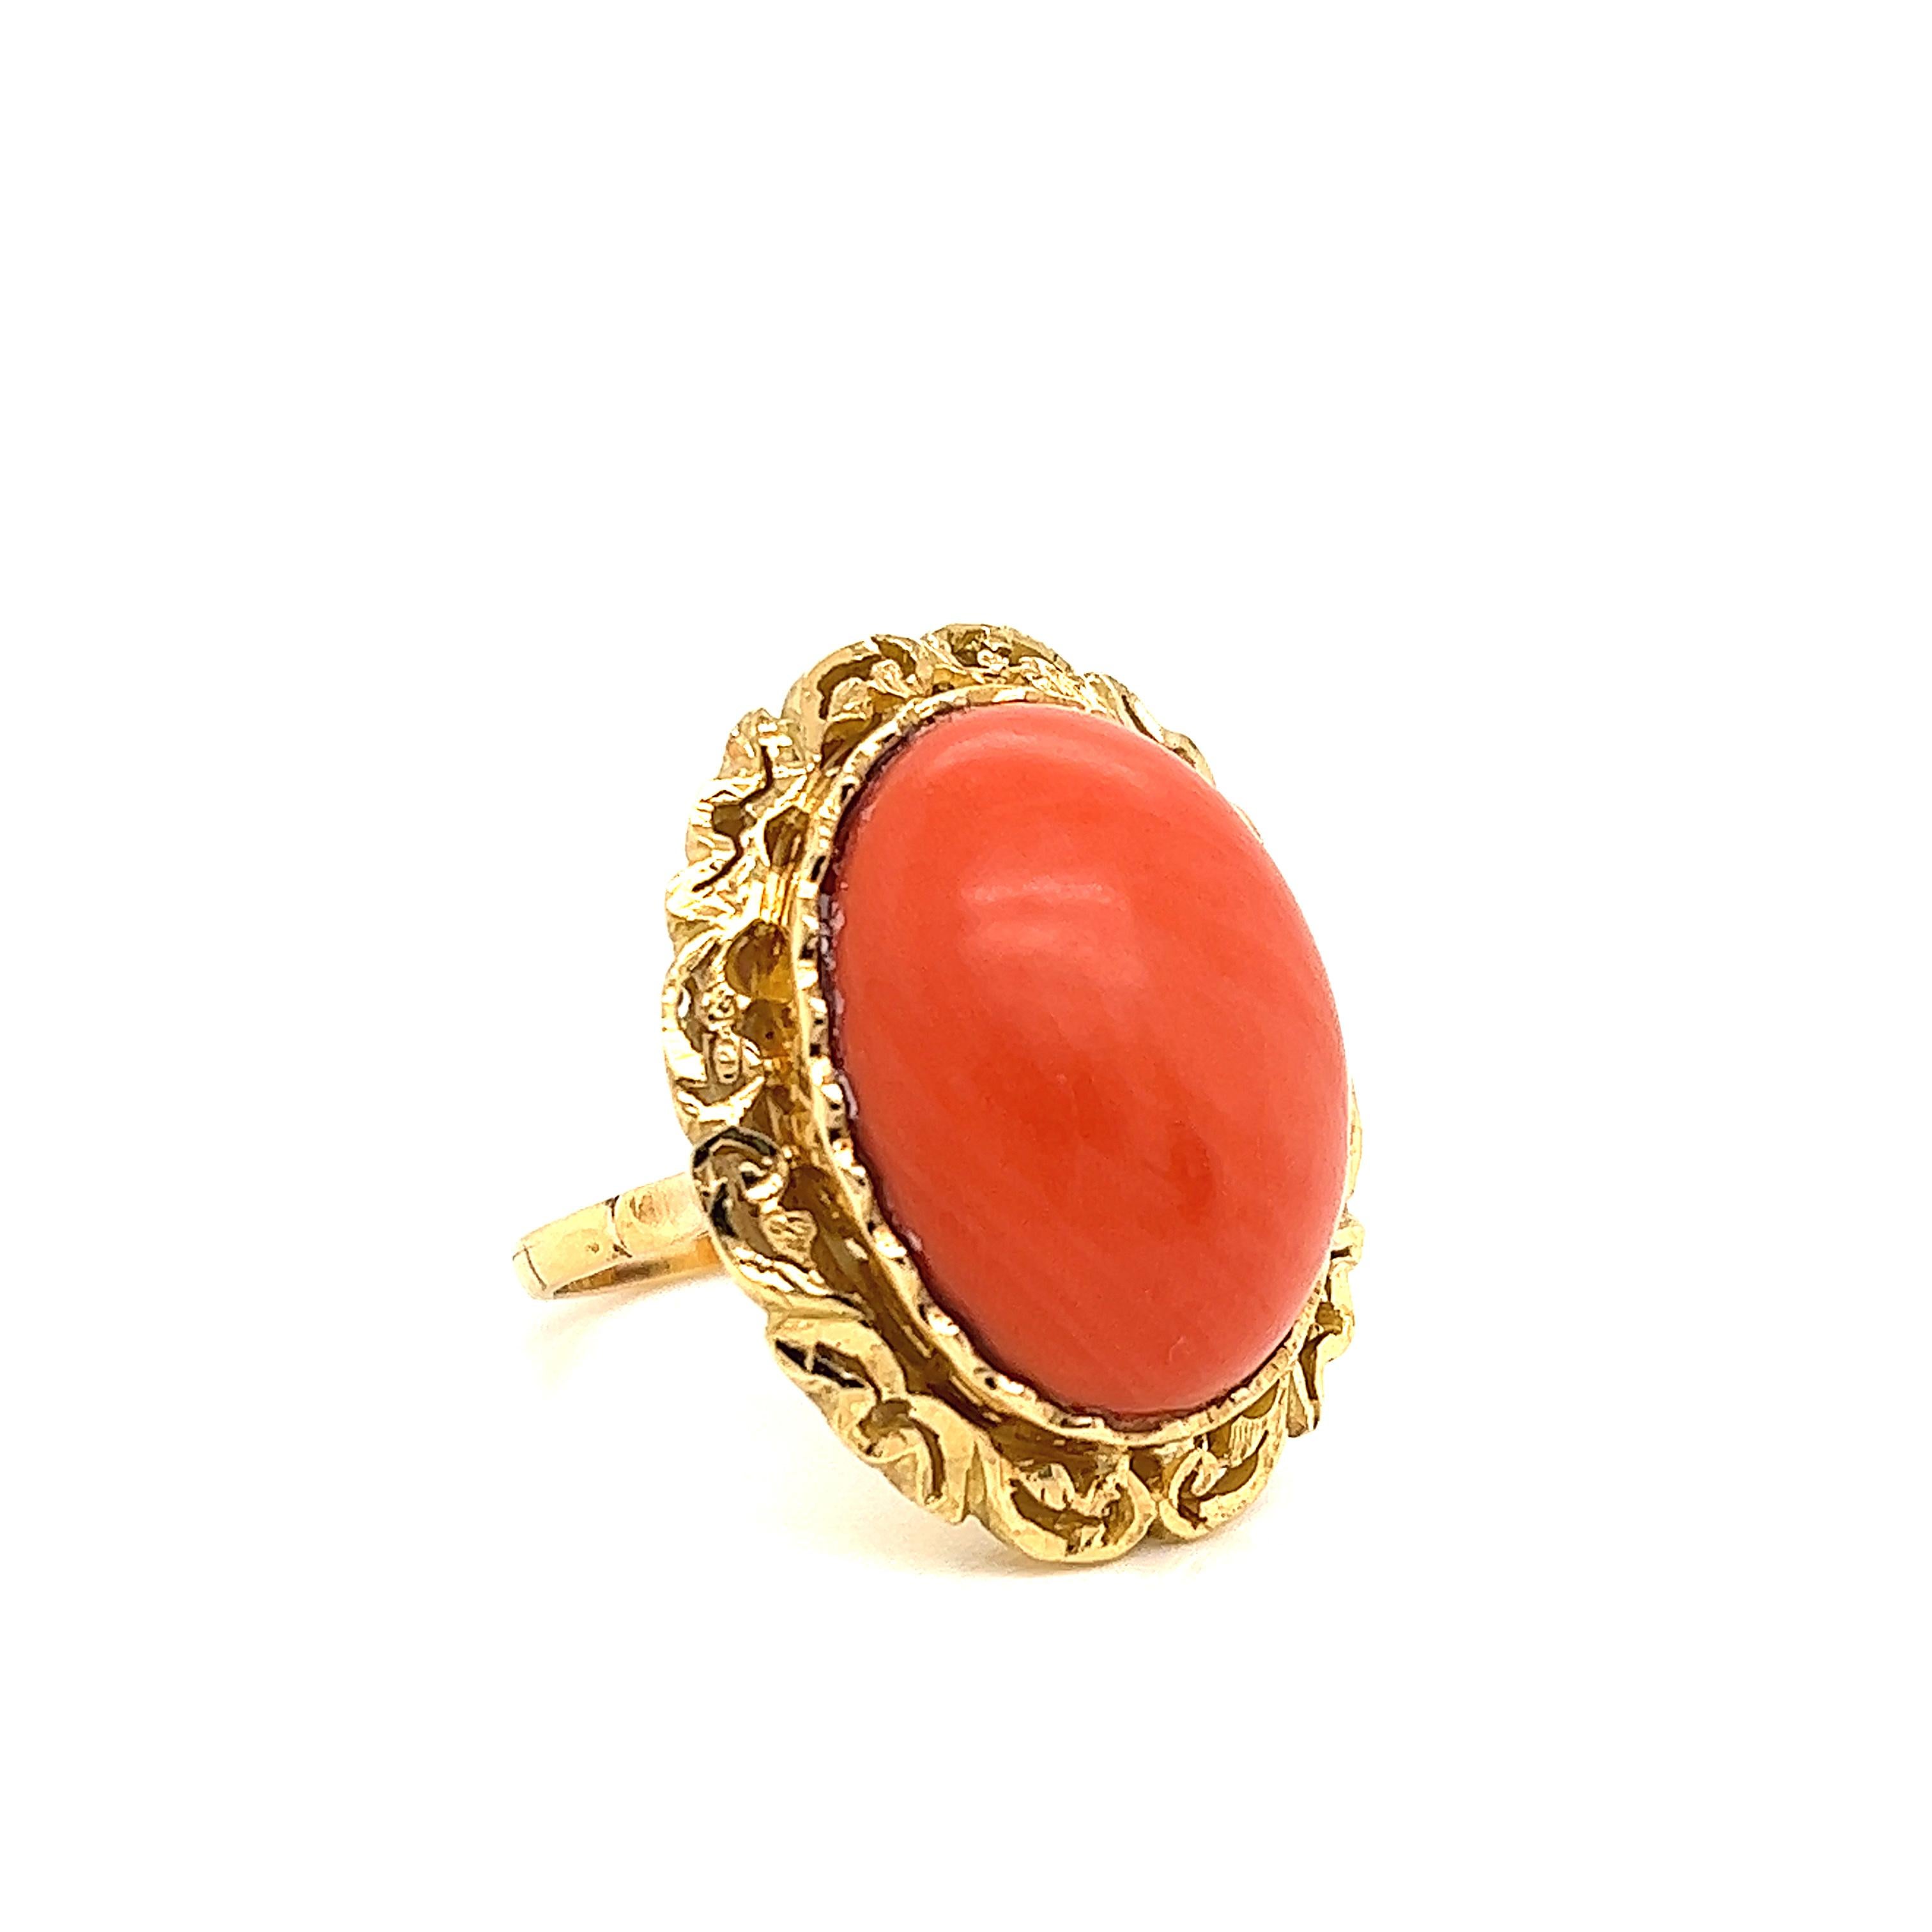 Gorgeous ring crafted in 18k yellow gold. The ring shows exquisite detail as a large coral gemstone is the focal point. The coral shows a beautiful red color and highlights this one of a kind design. The gemstone is bezel set and has a detailed